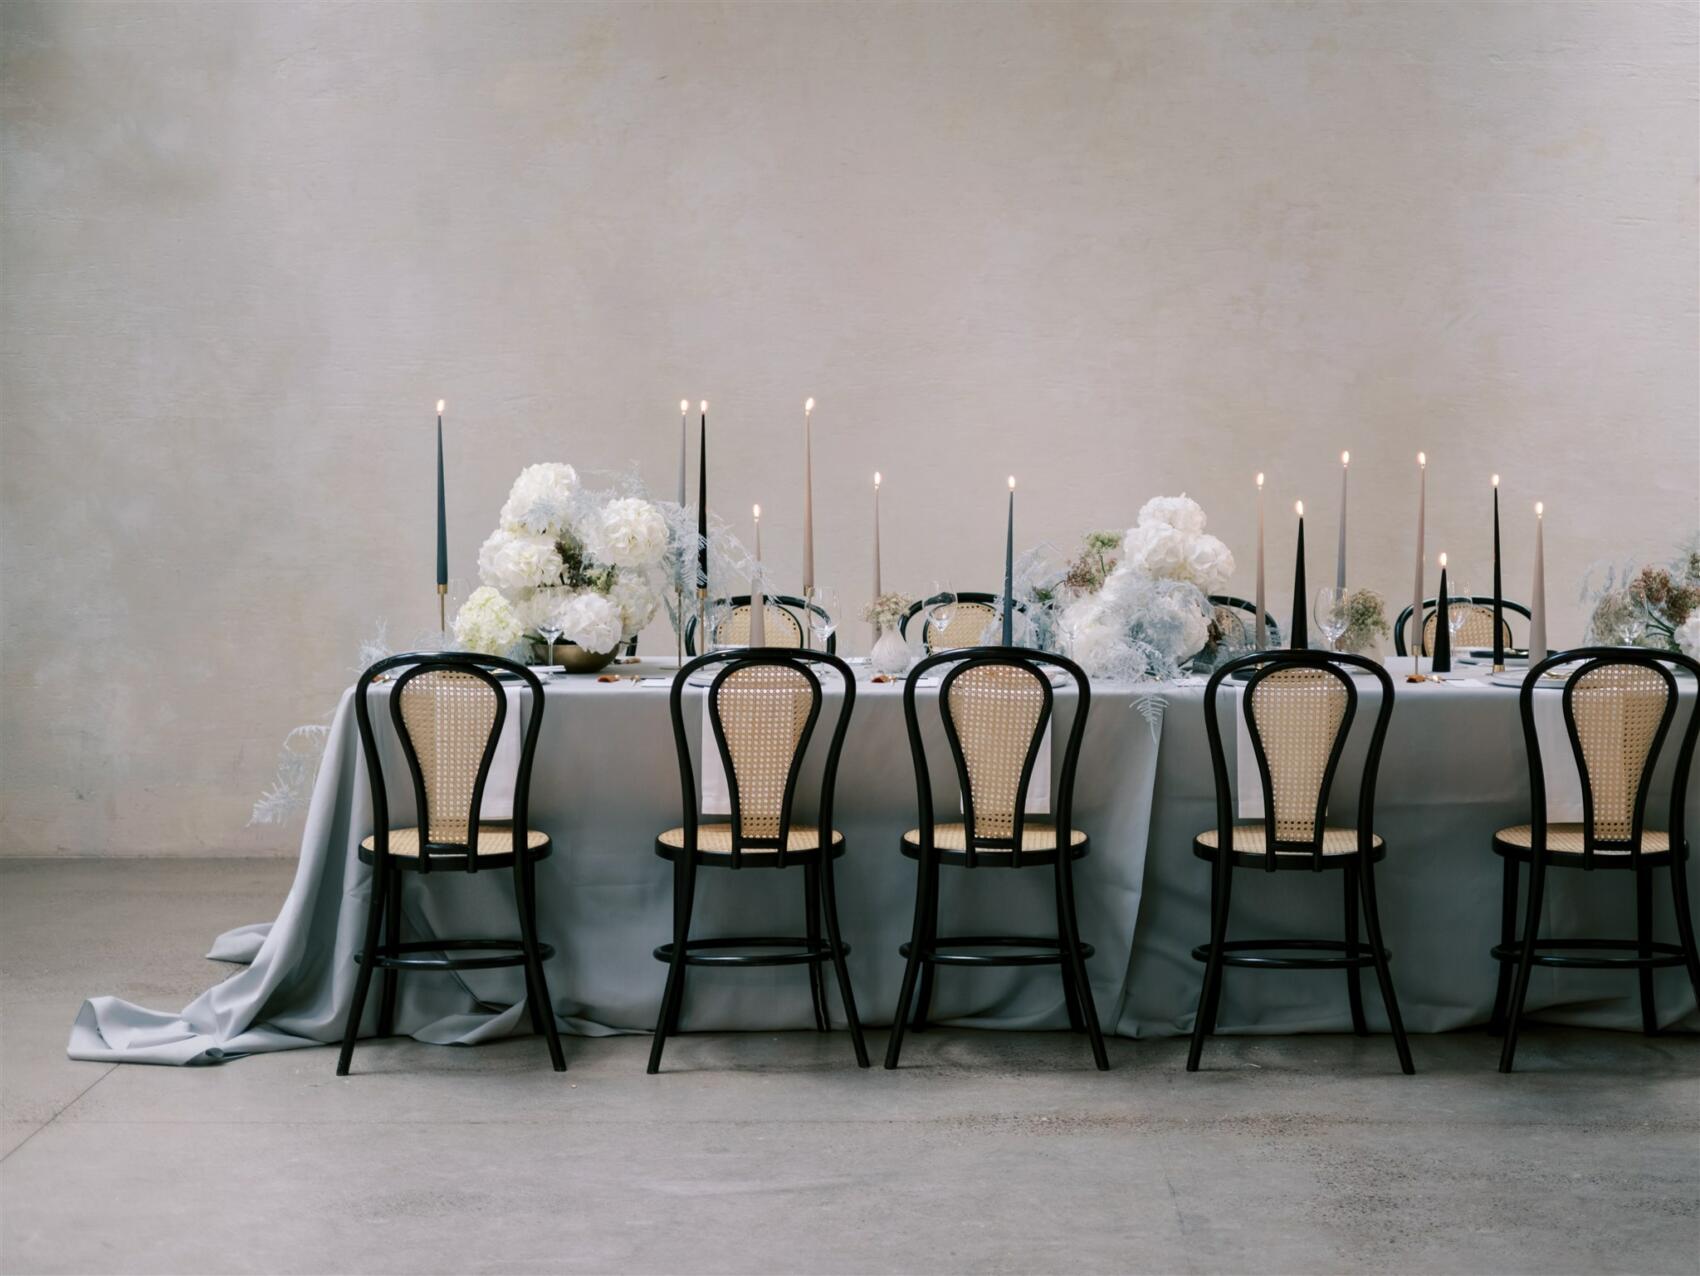 Pale dove grey modern wedding table decor by South Event Specialists. London & South UK modern wedding planners.